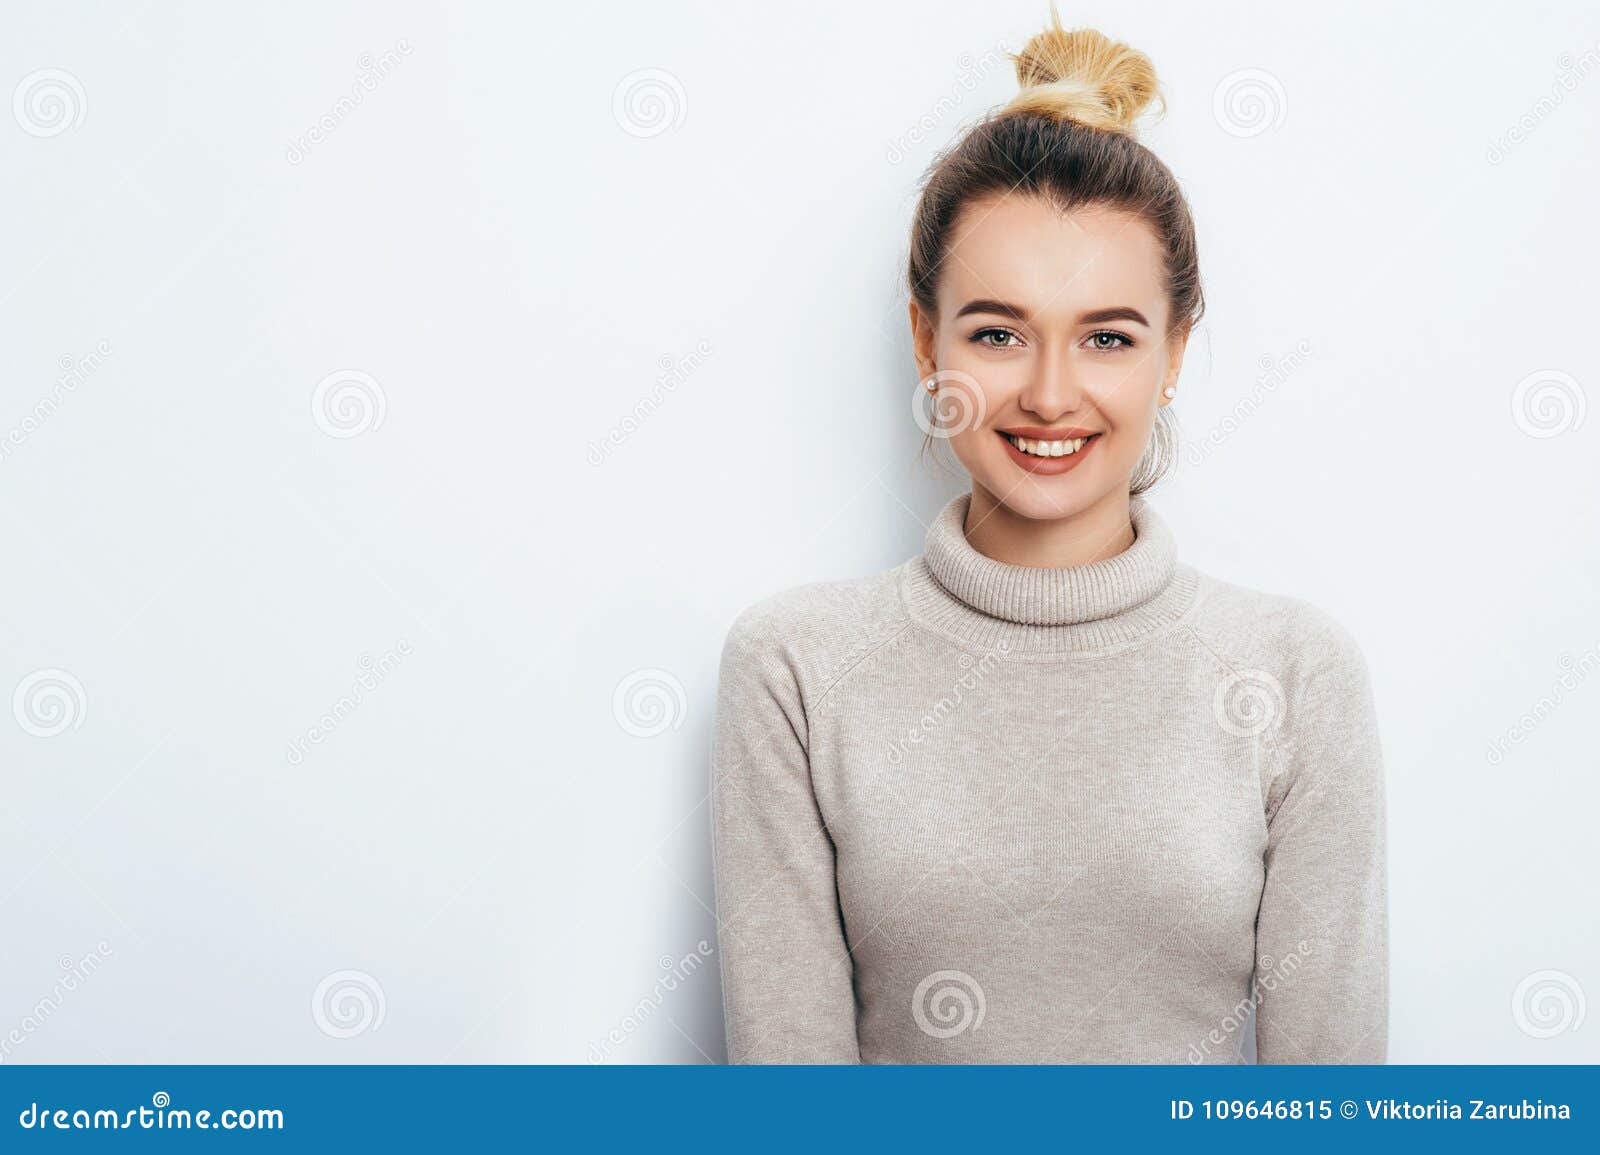 horizontal portrait of cheerful woman with appealing smile, having hair bun wearing in sweater  over white background.